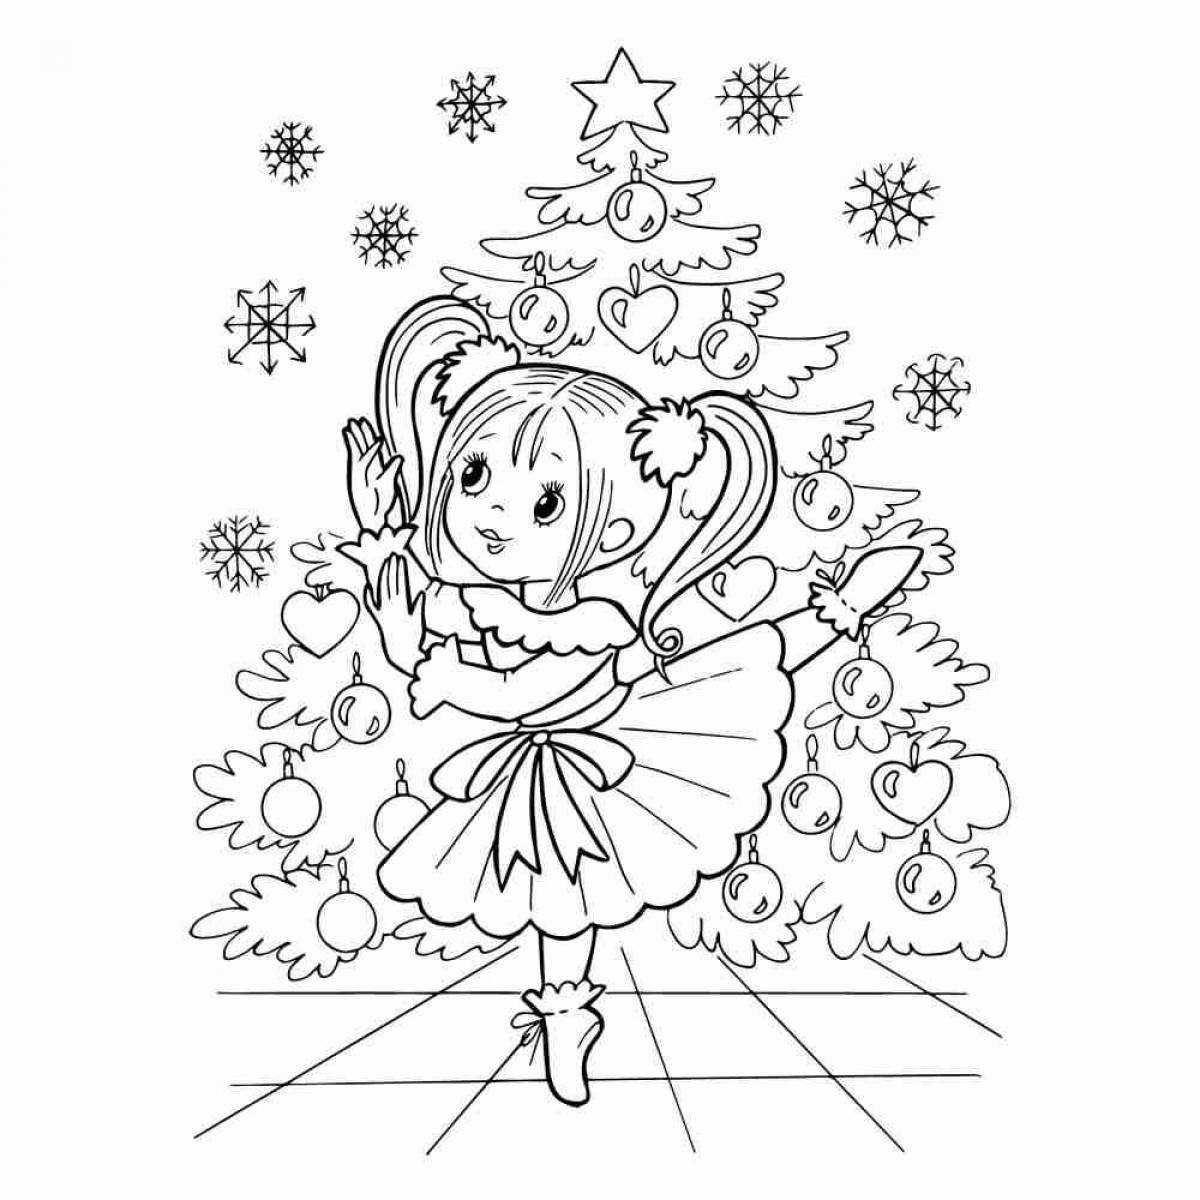 Great Christmas coloring book for 6-7 year olds